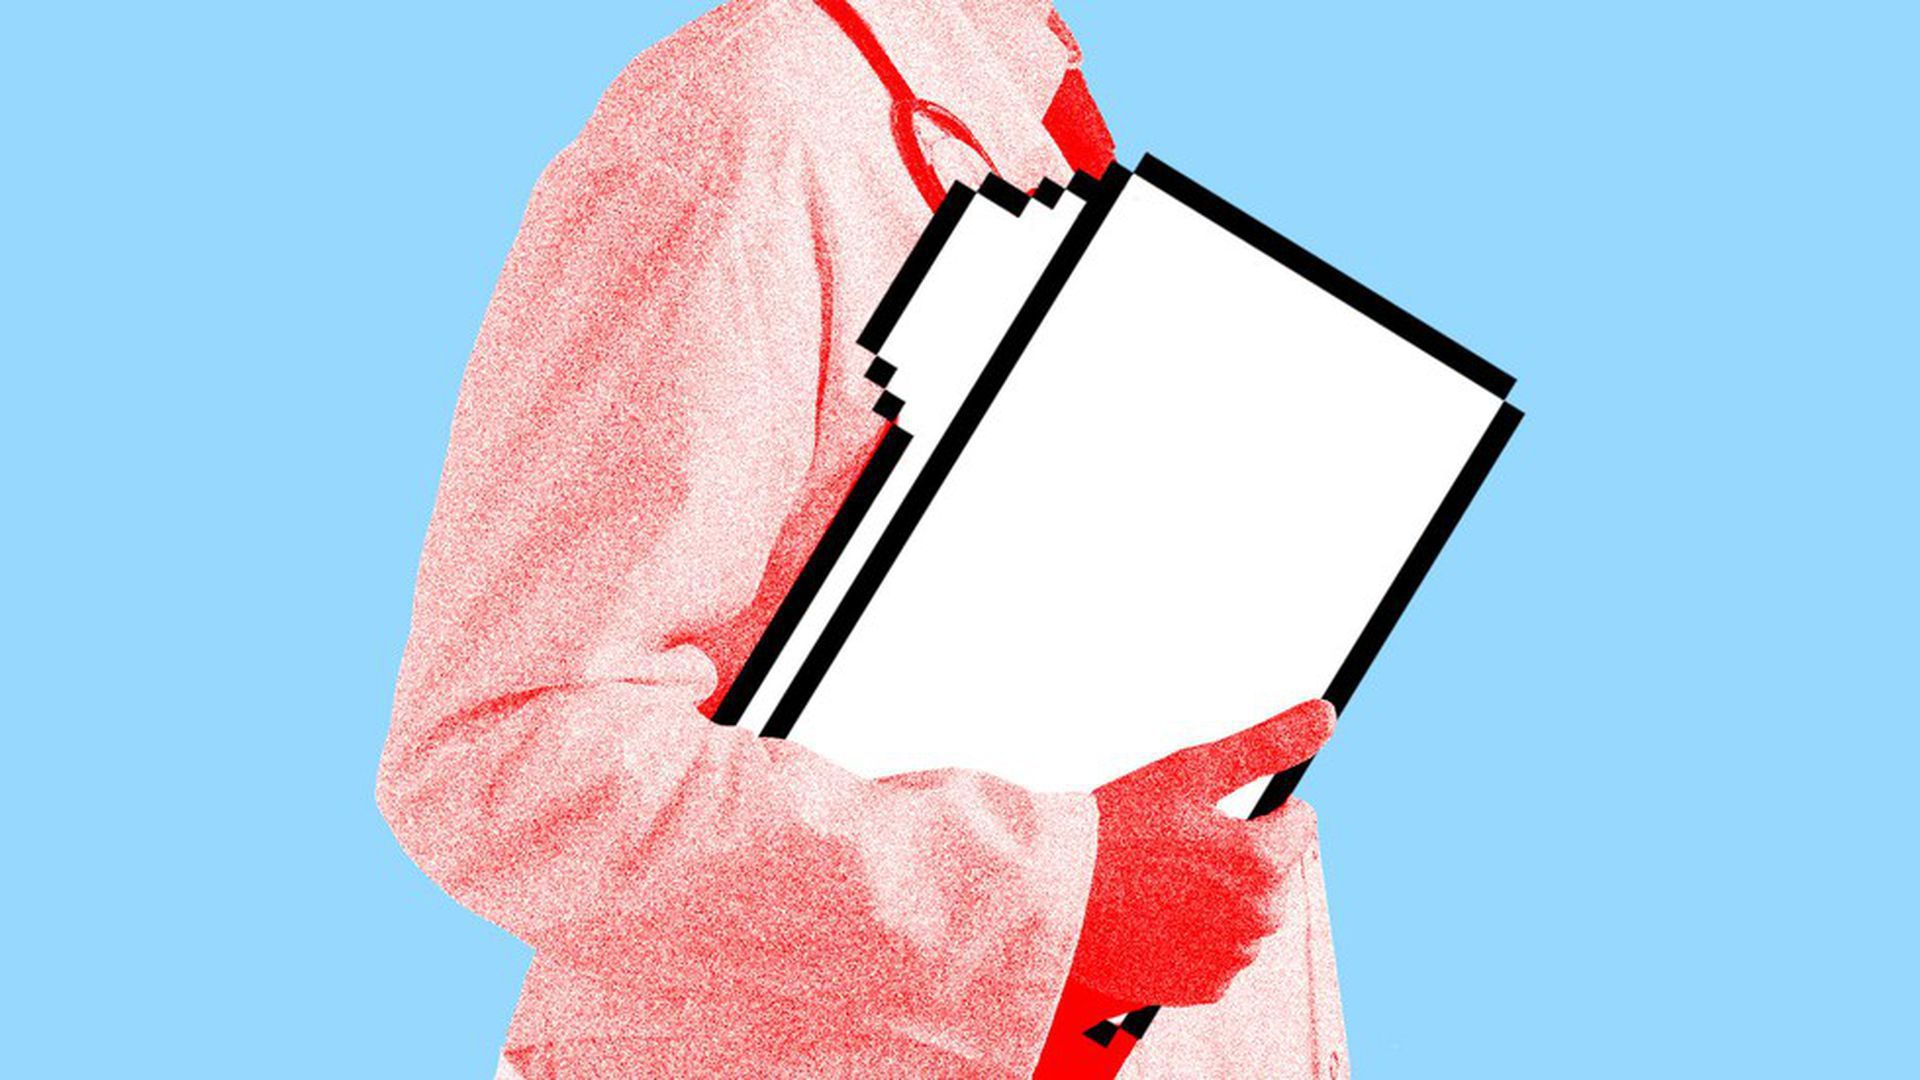 An illustration of a doctor holding files